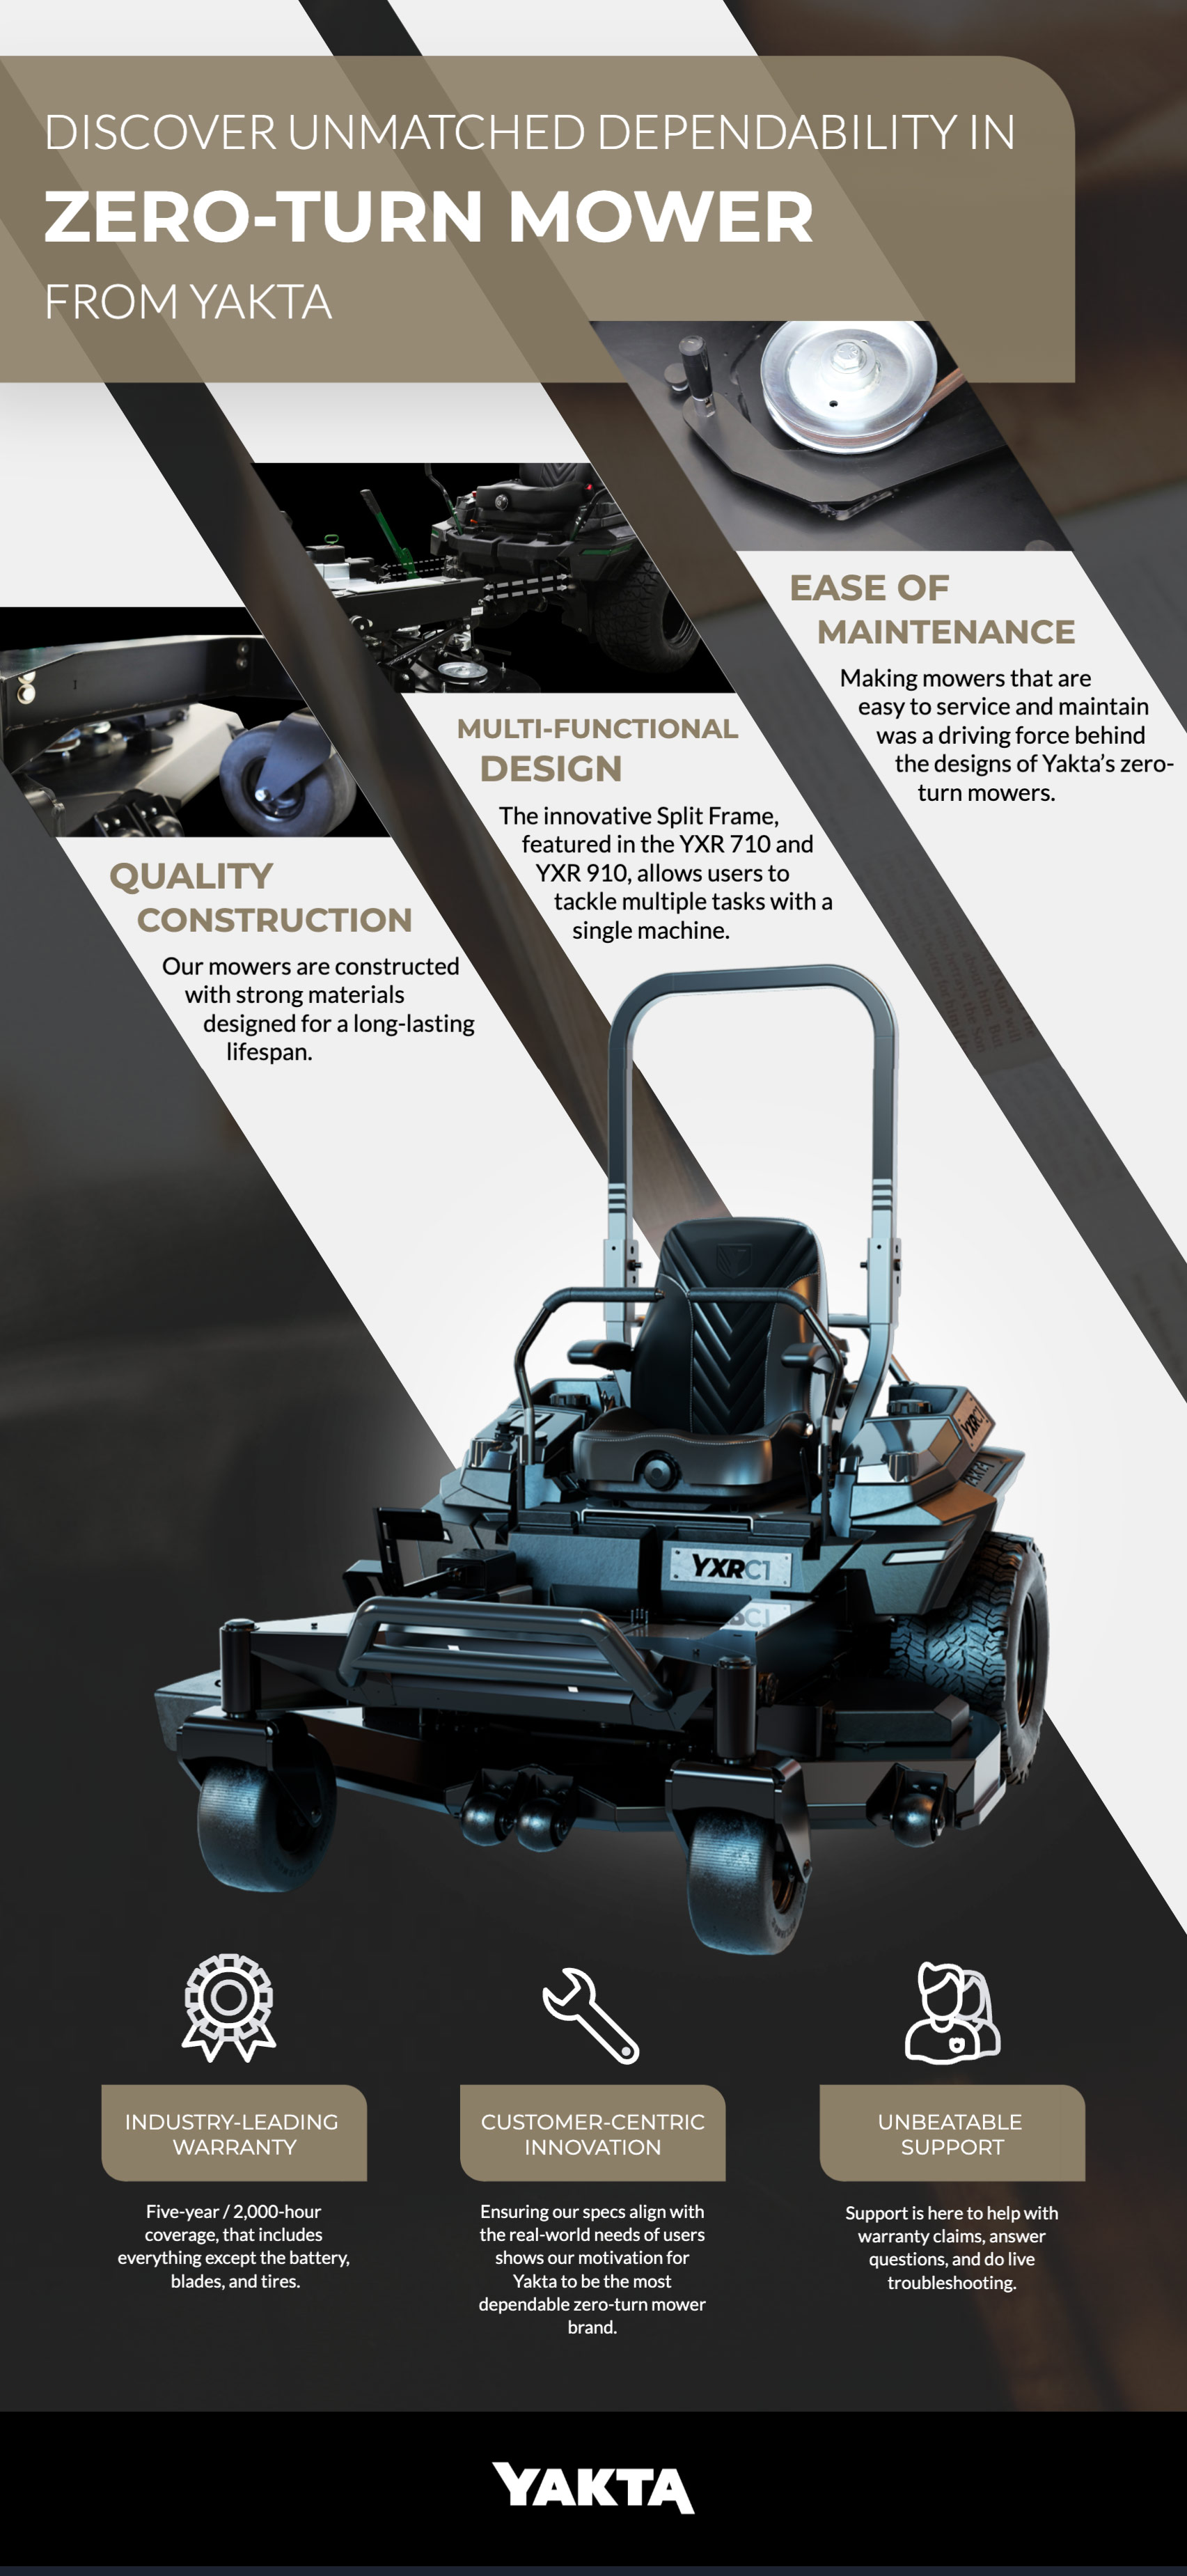 Quality construction, design, & easy maintenance in dependable Yakta mowers